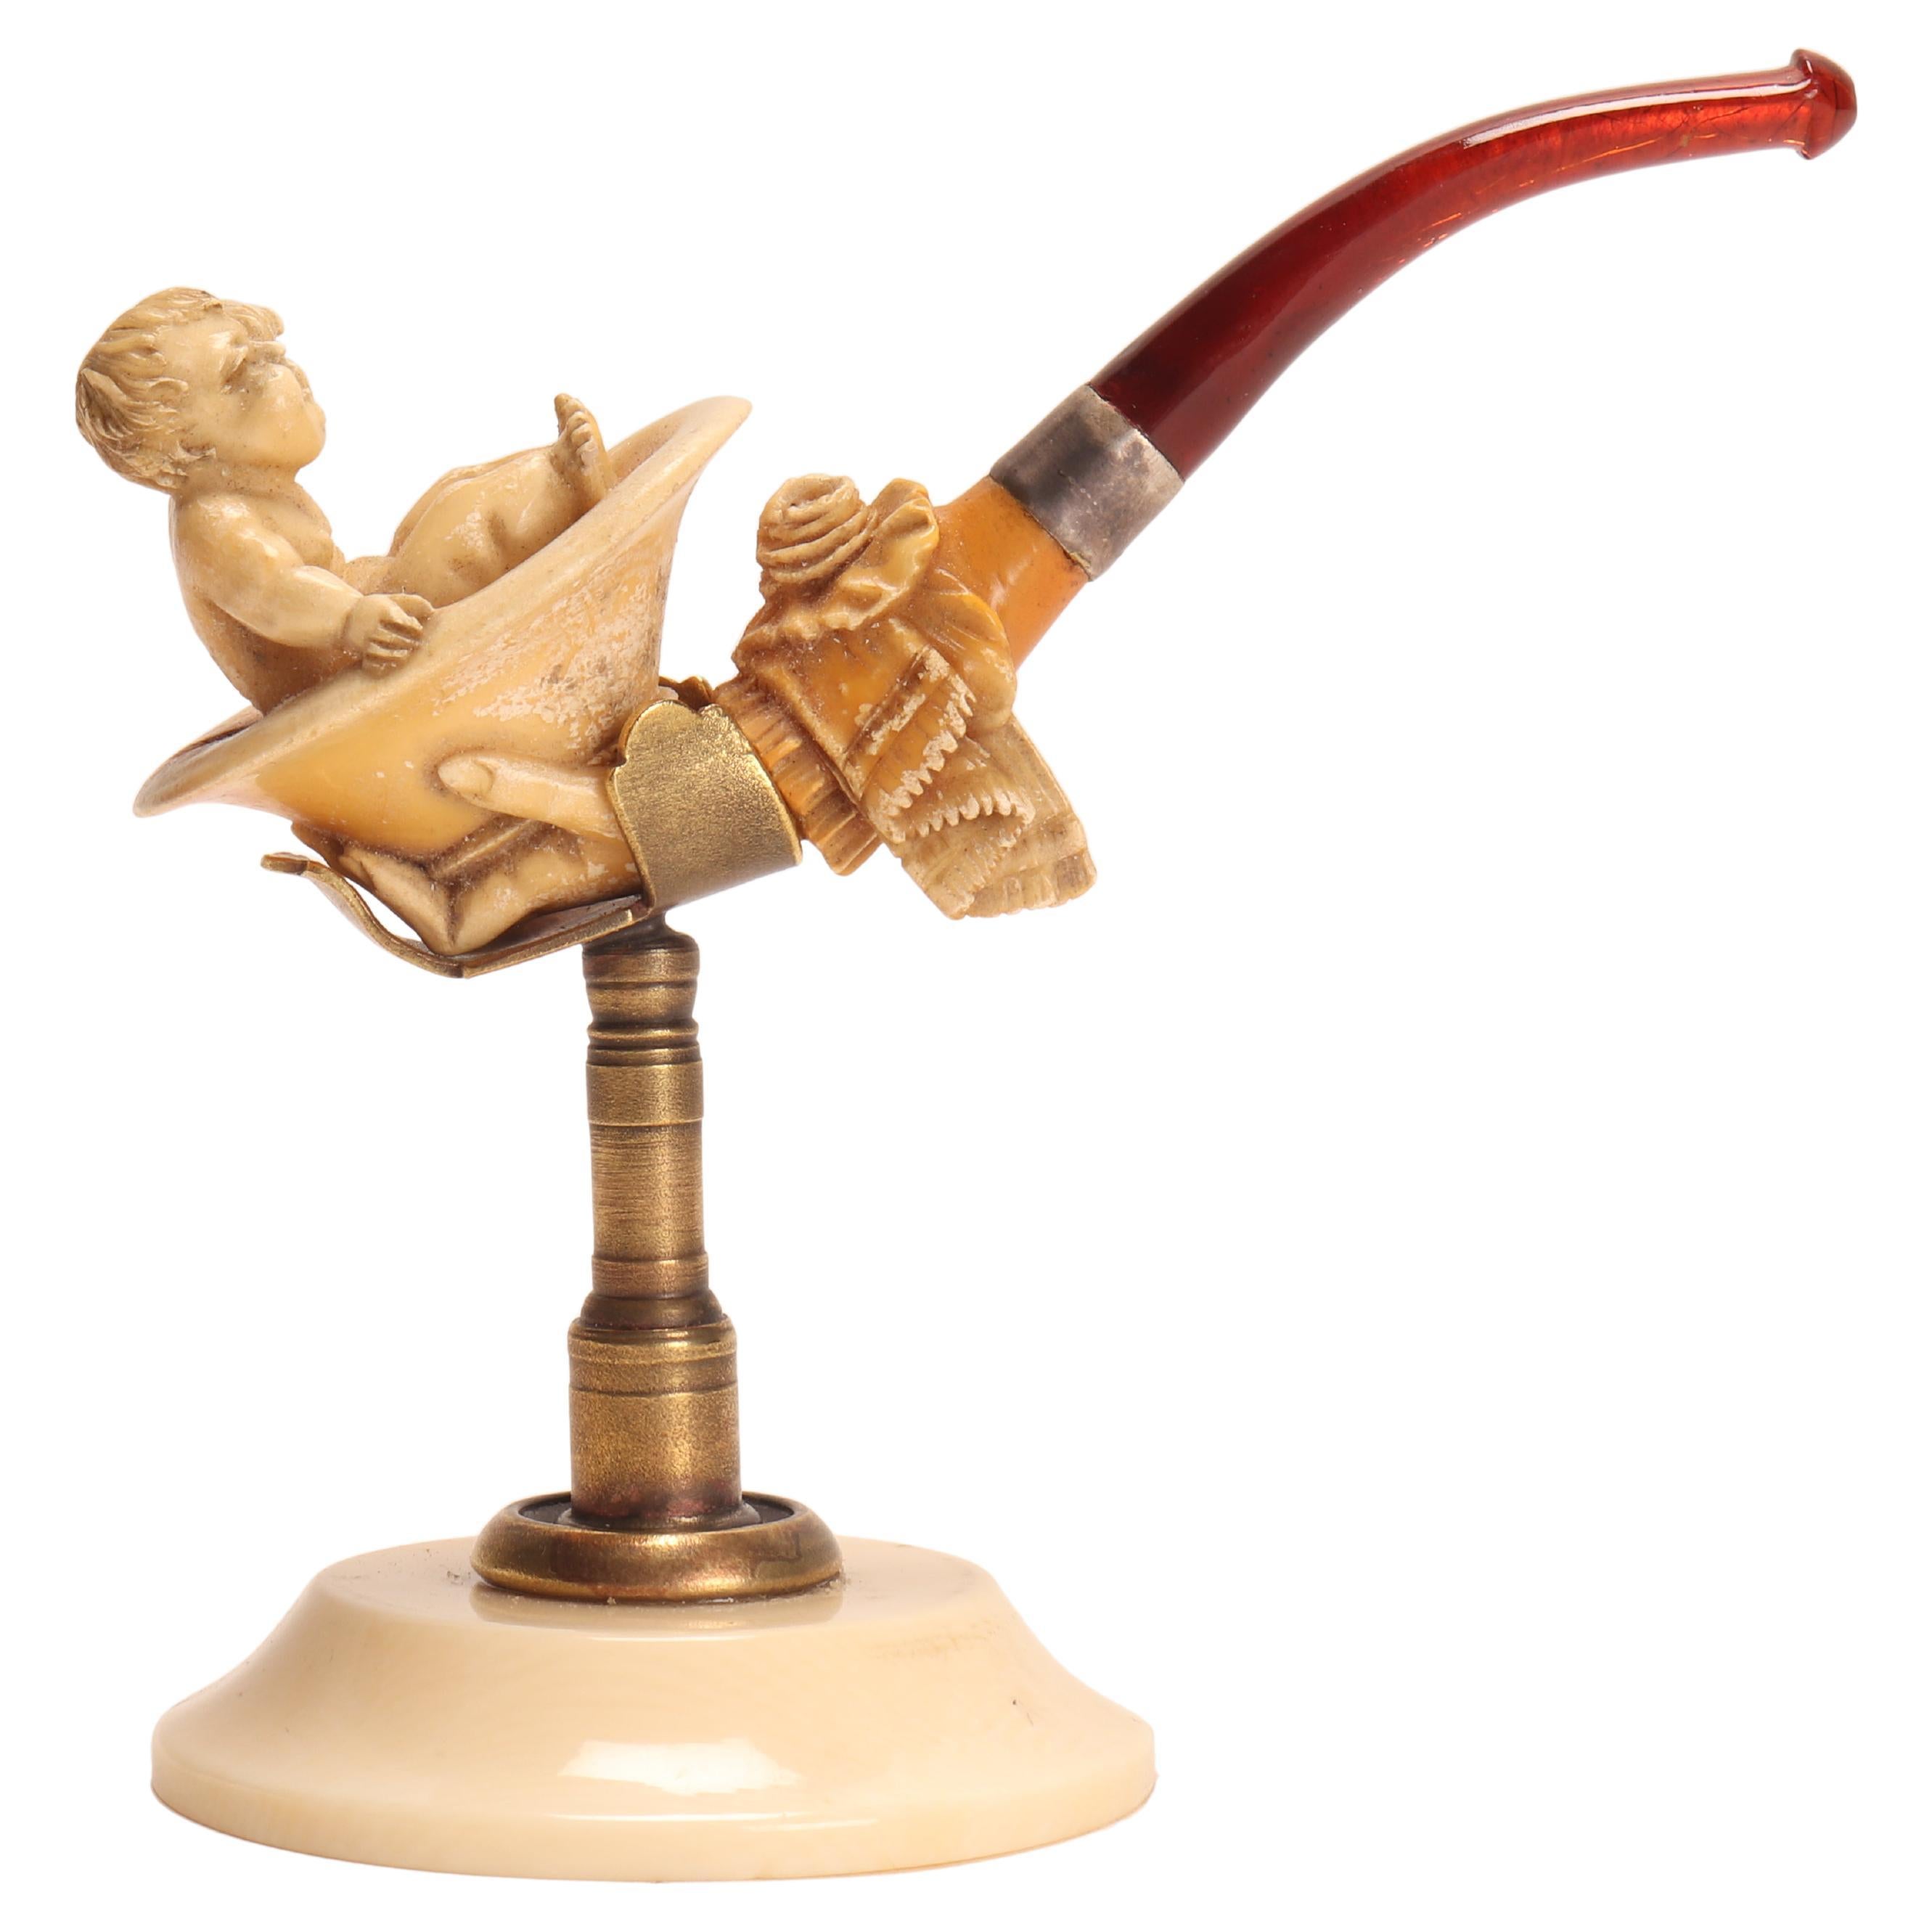 Meershaum Pipe with a Child, Vienna, 1880